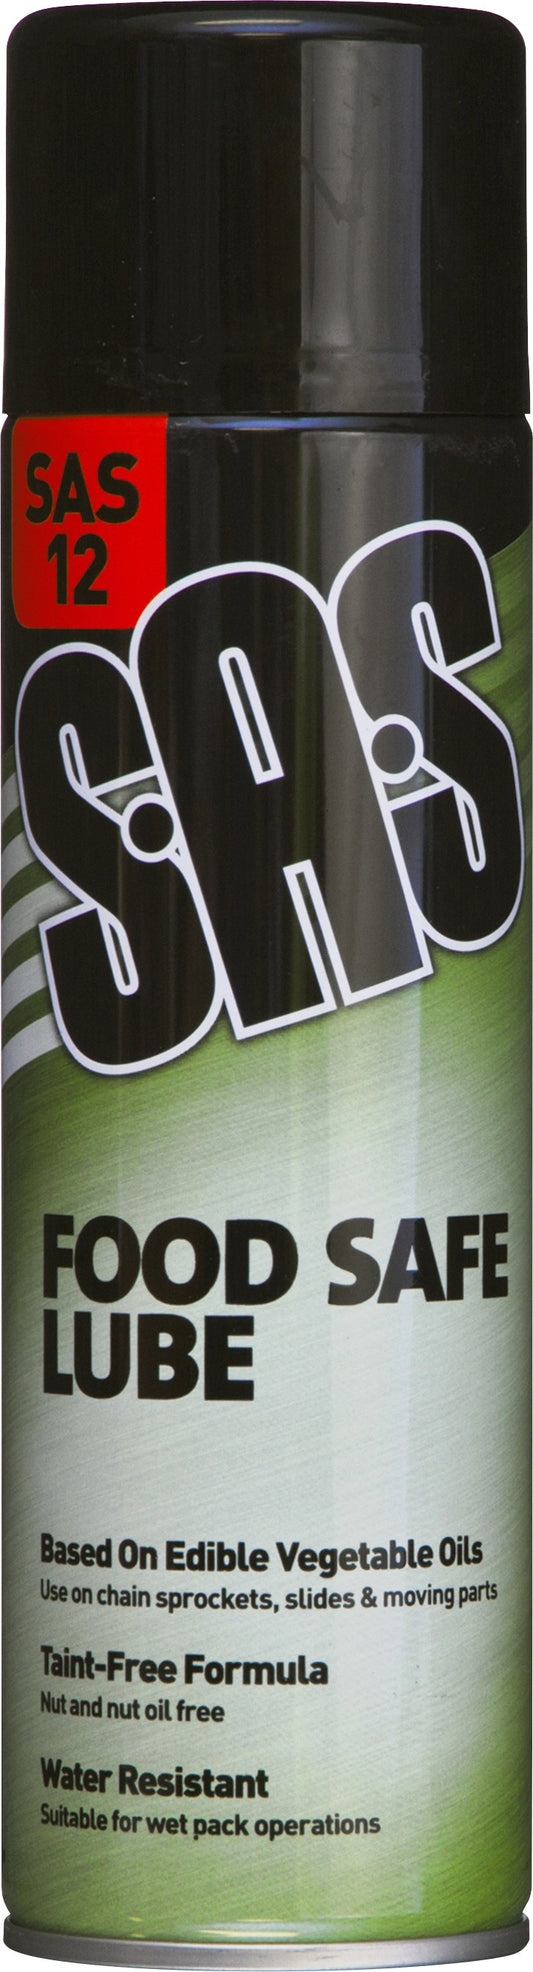 S.A.S Food Safe Lube 500ml